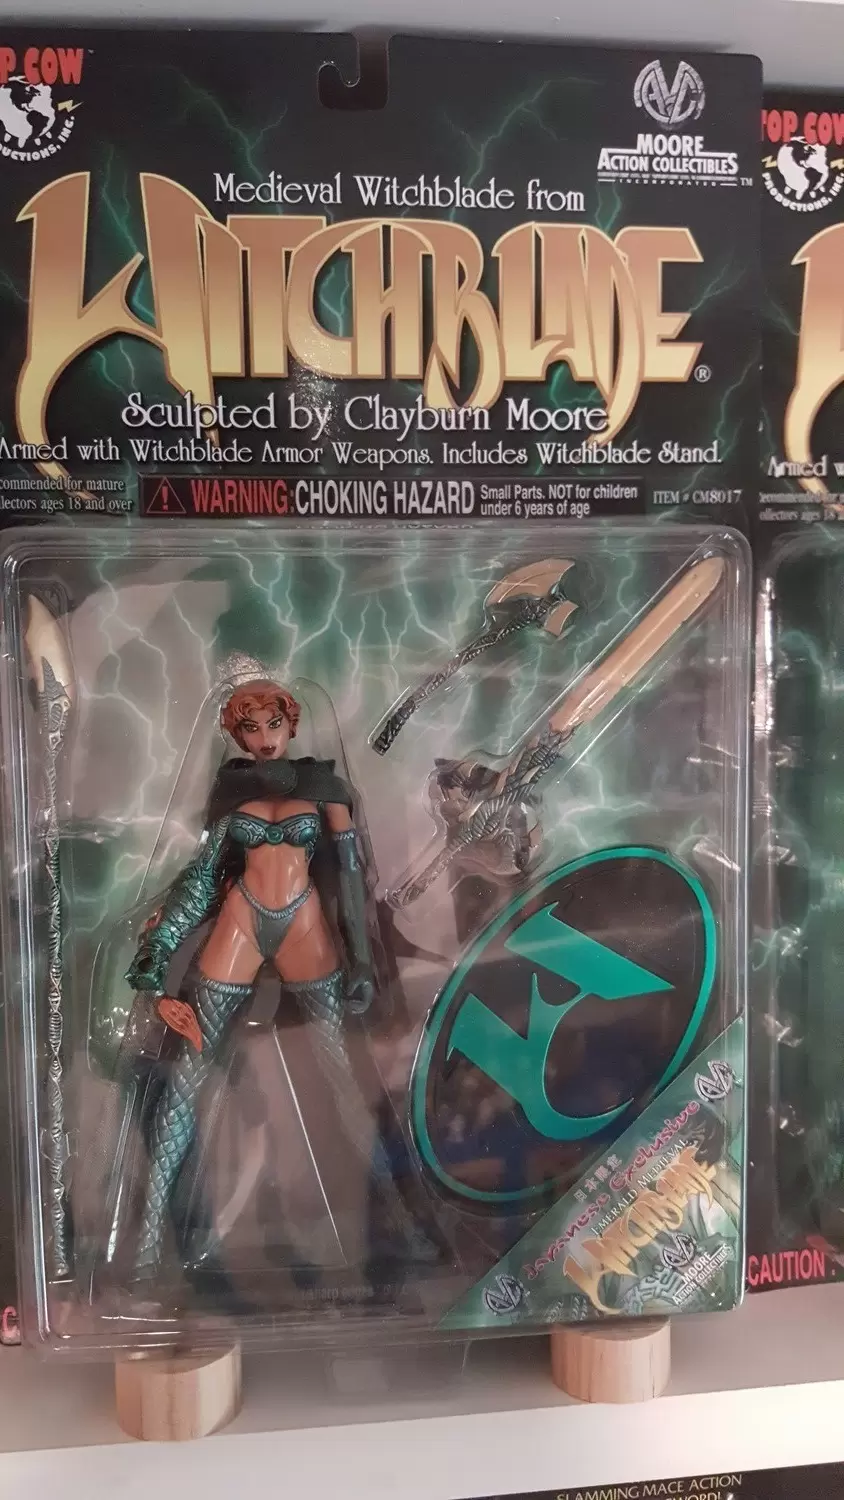 WITCHBLADE 1998 MOORE COLLECTIBLES MEDIEVAL WITCHBLADE 